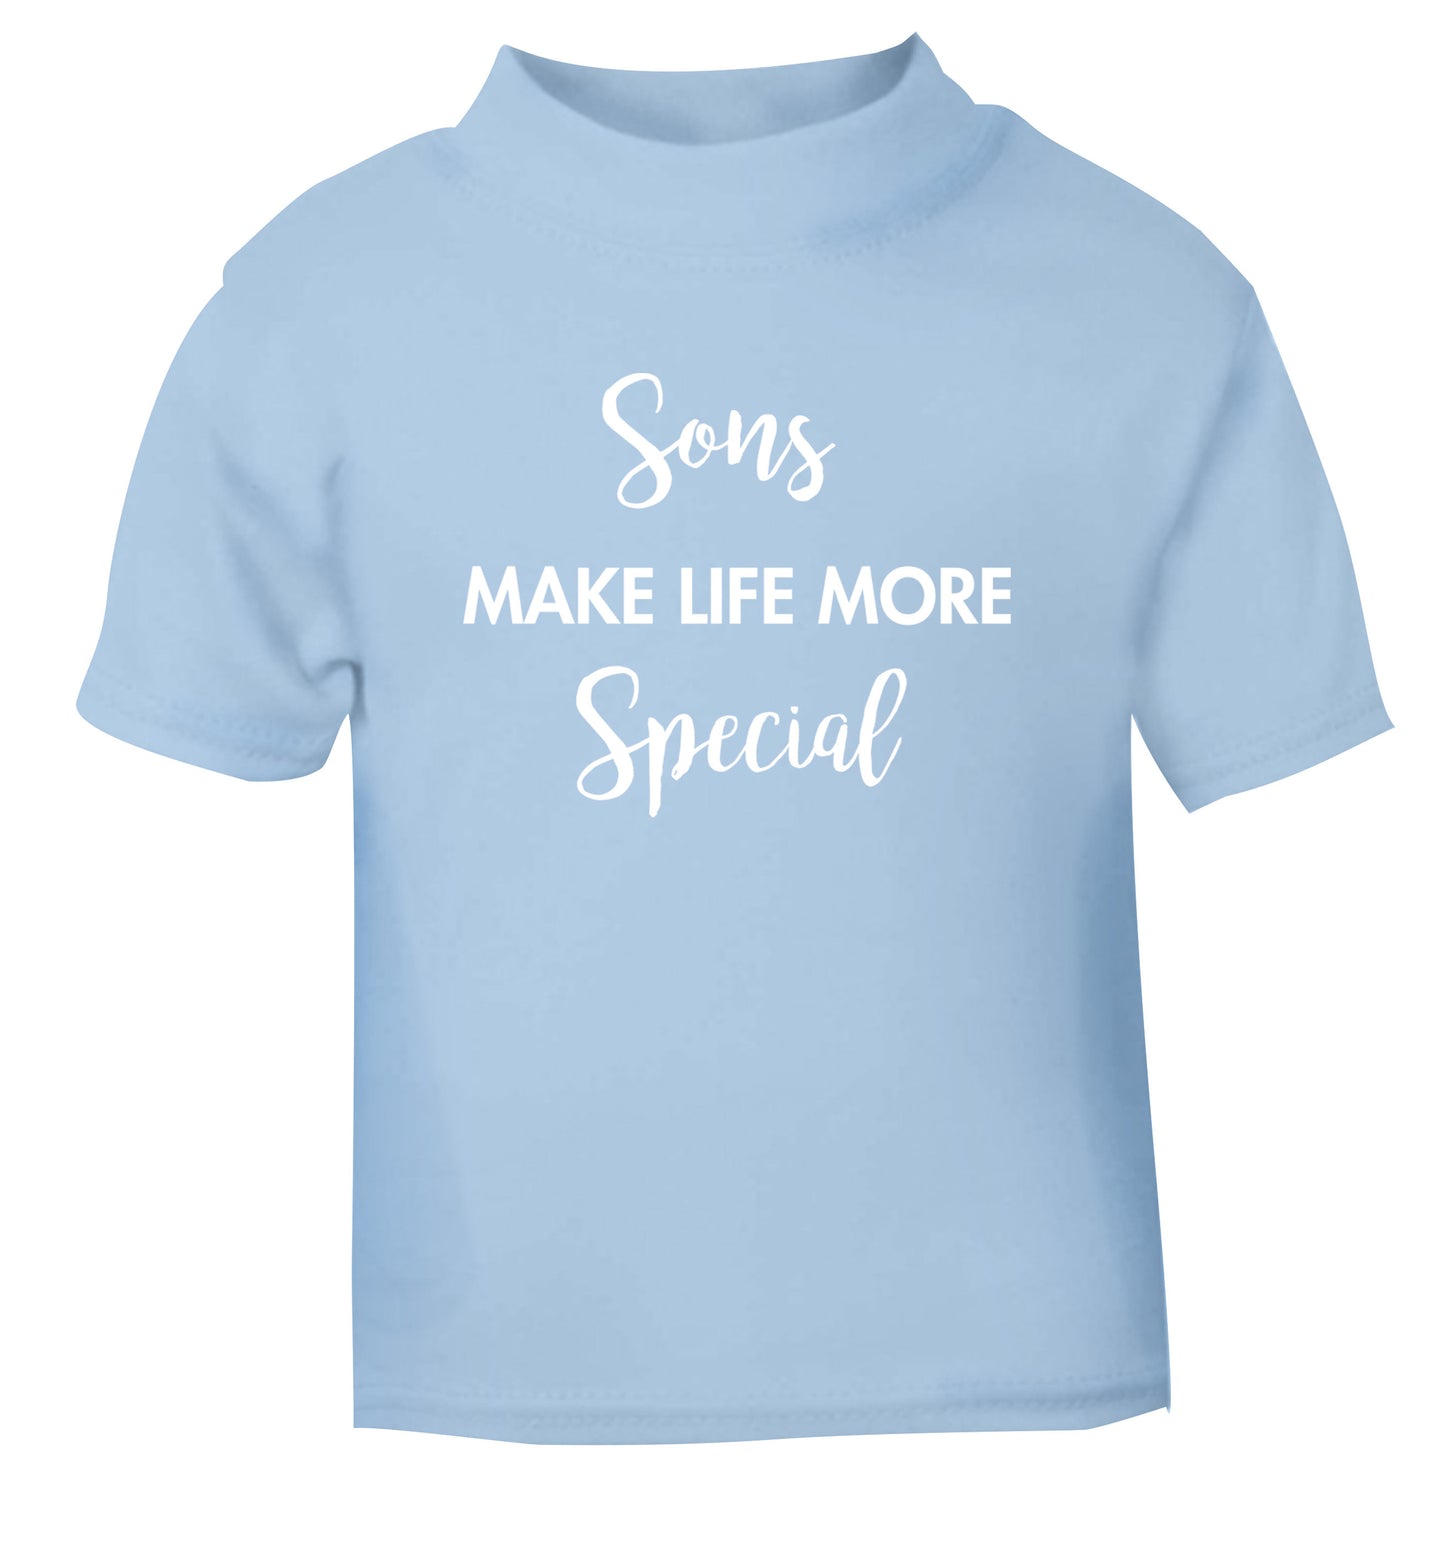 Sons make life more special light blue Baby Toddler Tshirt 2 Years